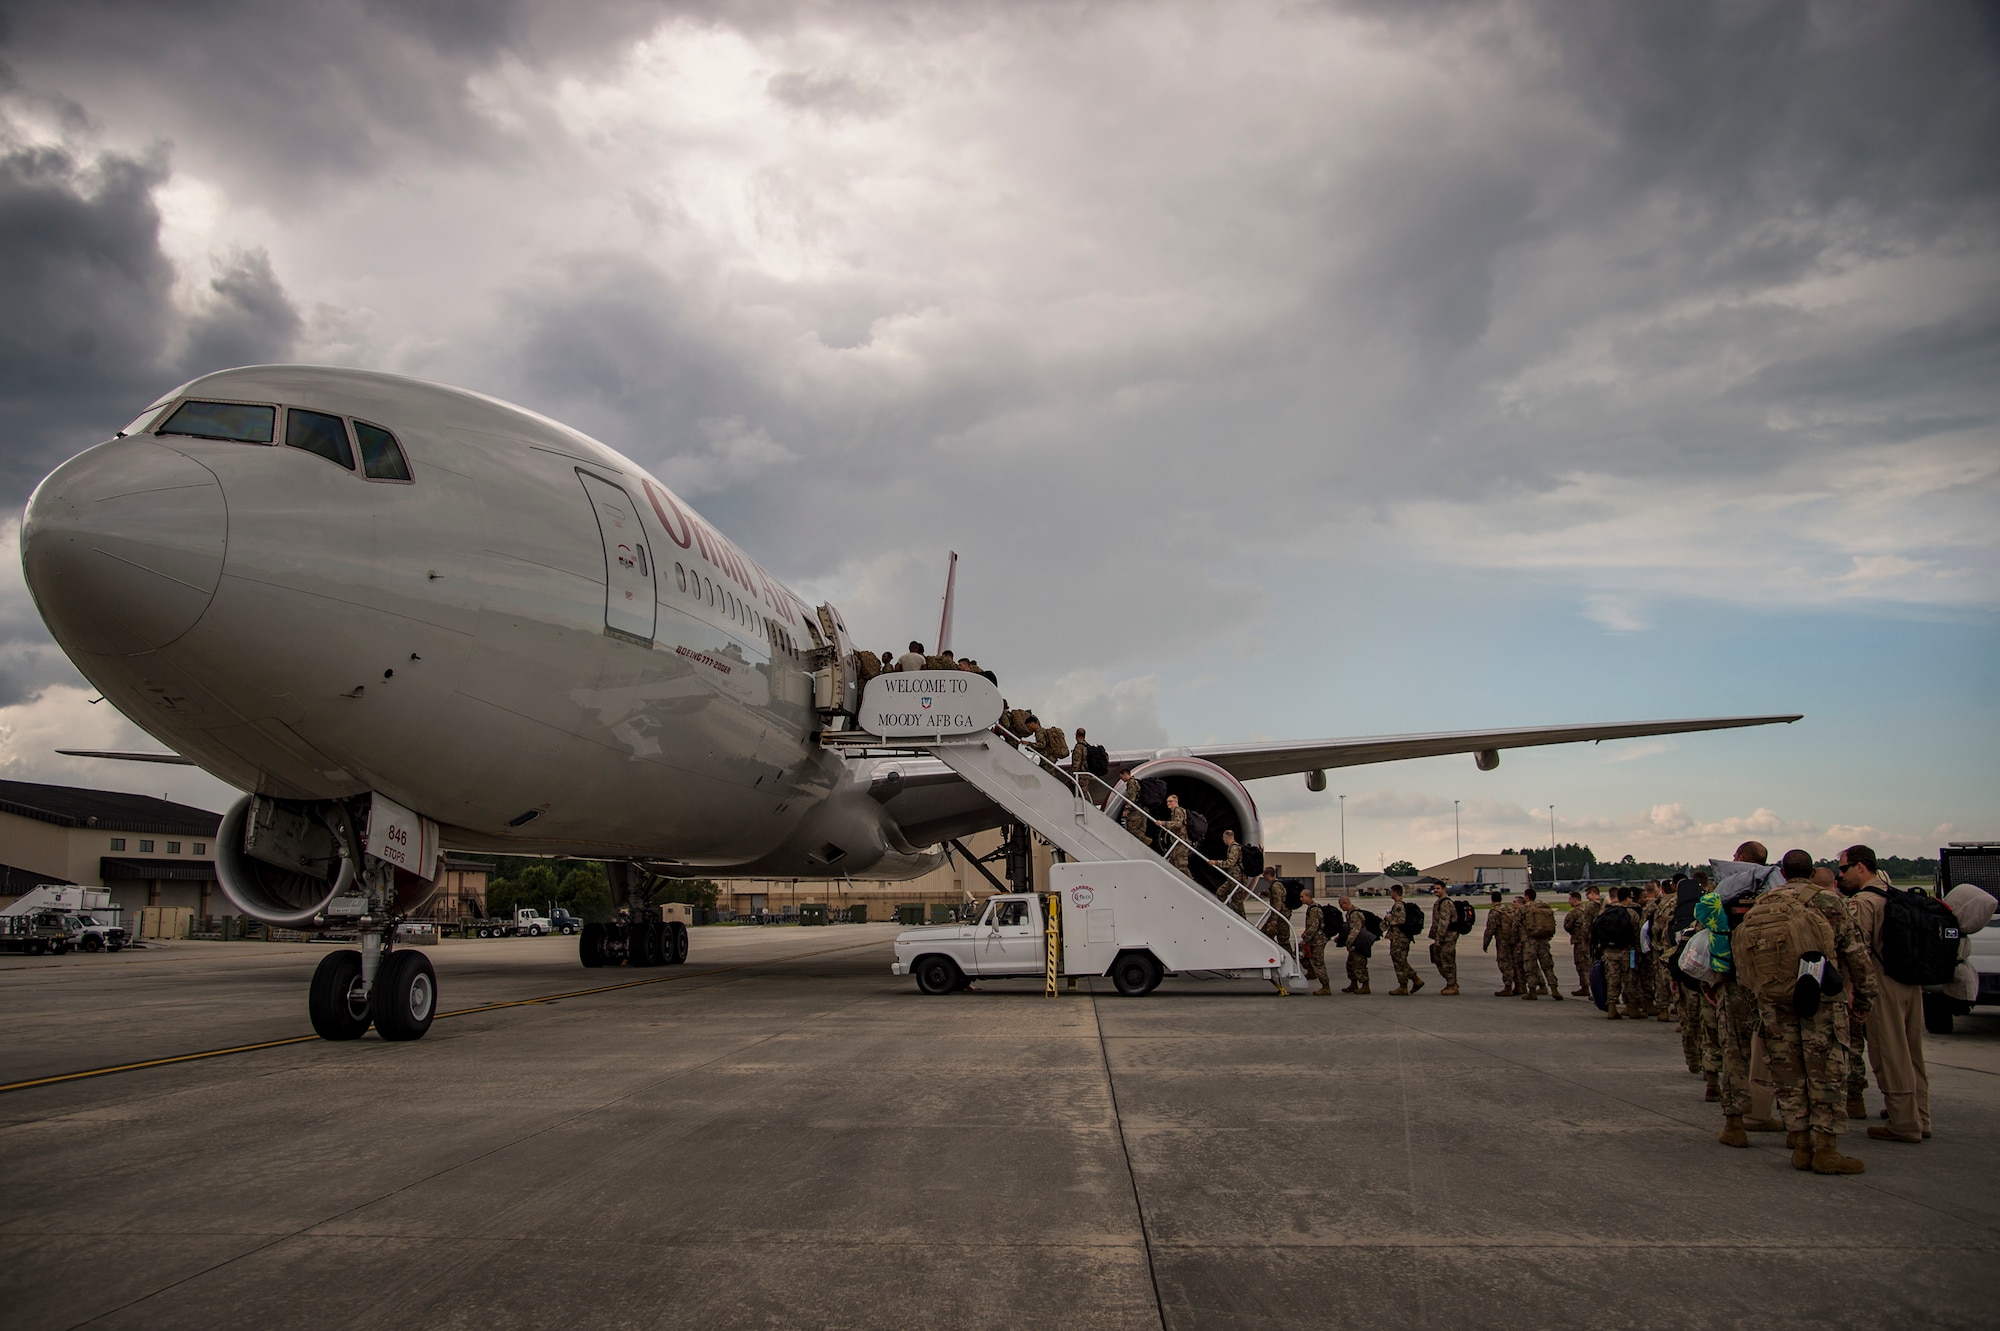 Airmen from the 75th Fighter Squadron (FS) and supporting units board a plane July 8, 2018, at Moody Air Force Base, Ga. The 75th FS and supporting units deployed to an undisclosed location in support of Operation Spartan Shield. (U.S. Air Force photo by Andrea Jenkins)